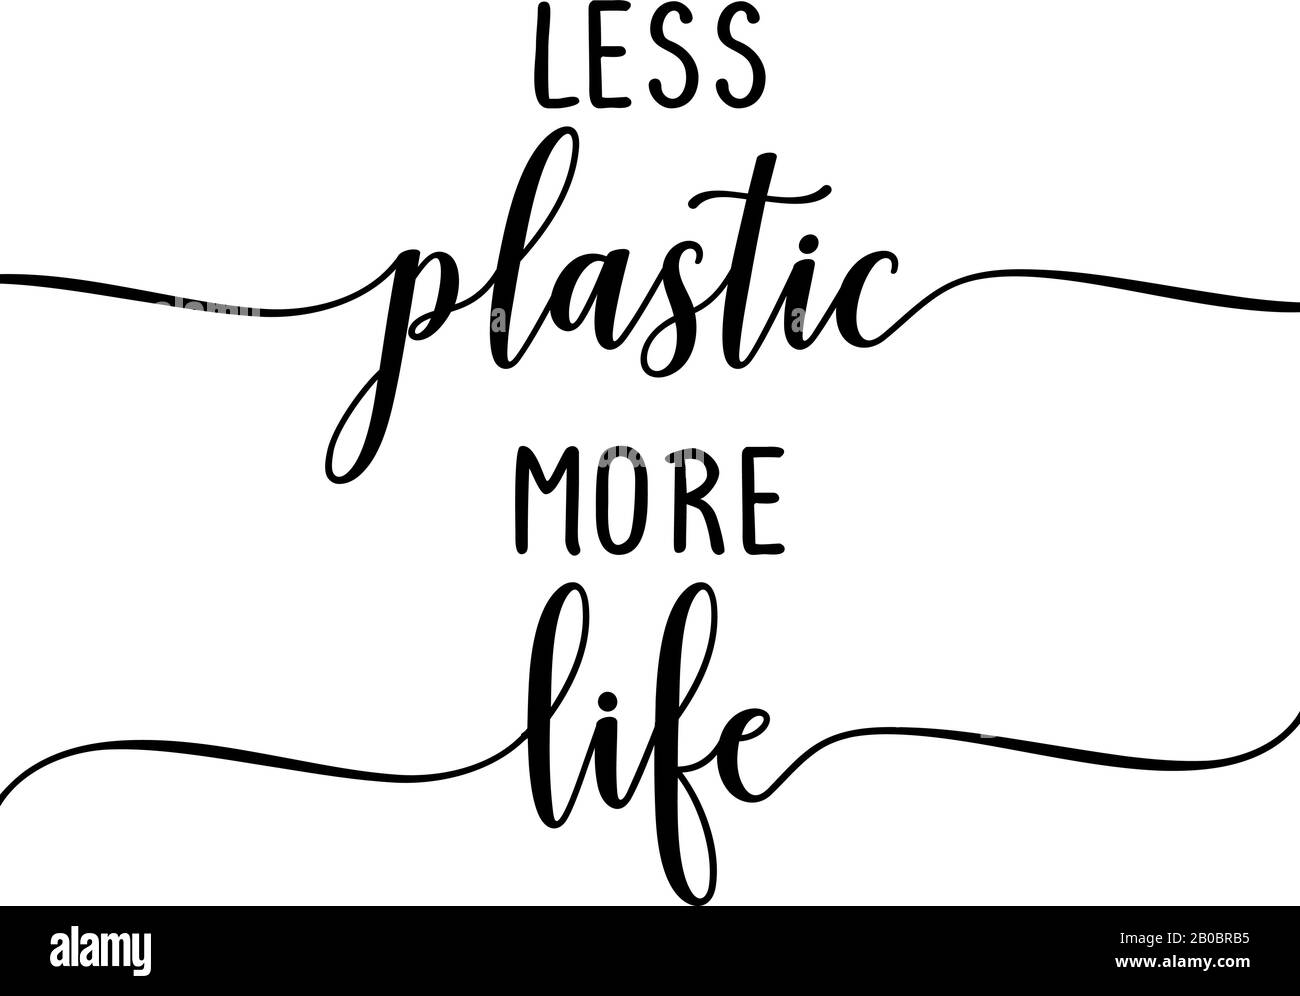 https://c8.alamy.com/comp/2B0BRB5/less-plastic-more-life-eco-friendly-slogan-hand-drawn-lettering-quote-vector-illustration-good-for-scrap-booking-posters-textiles-gifts-2B0BRB5.jpg